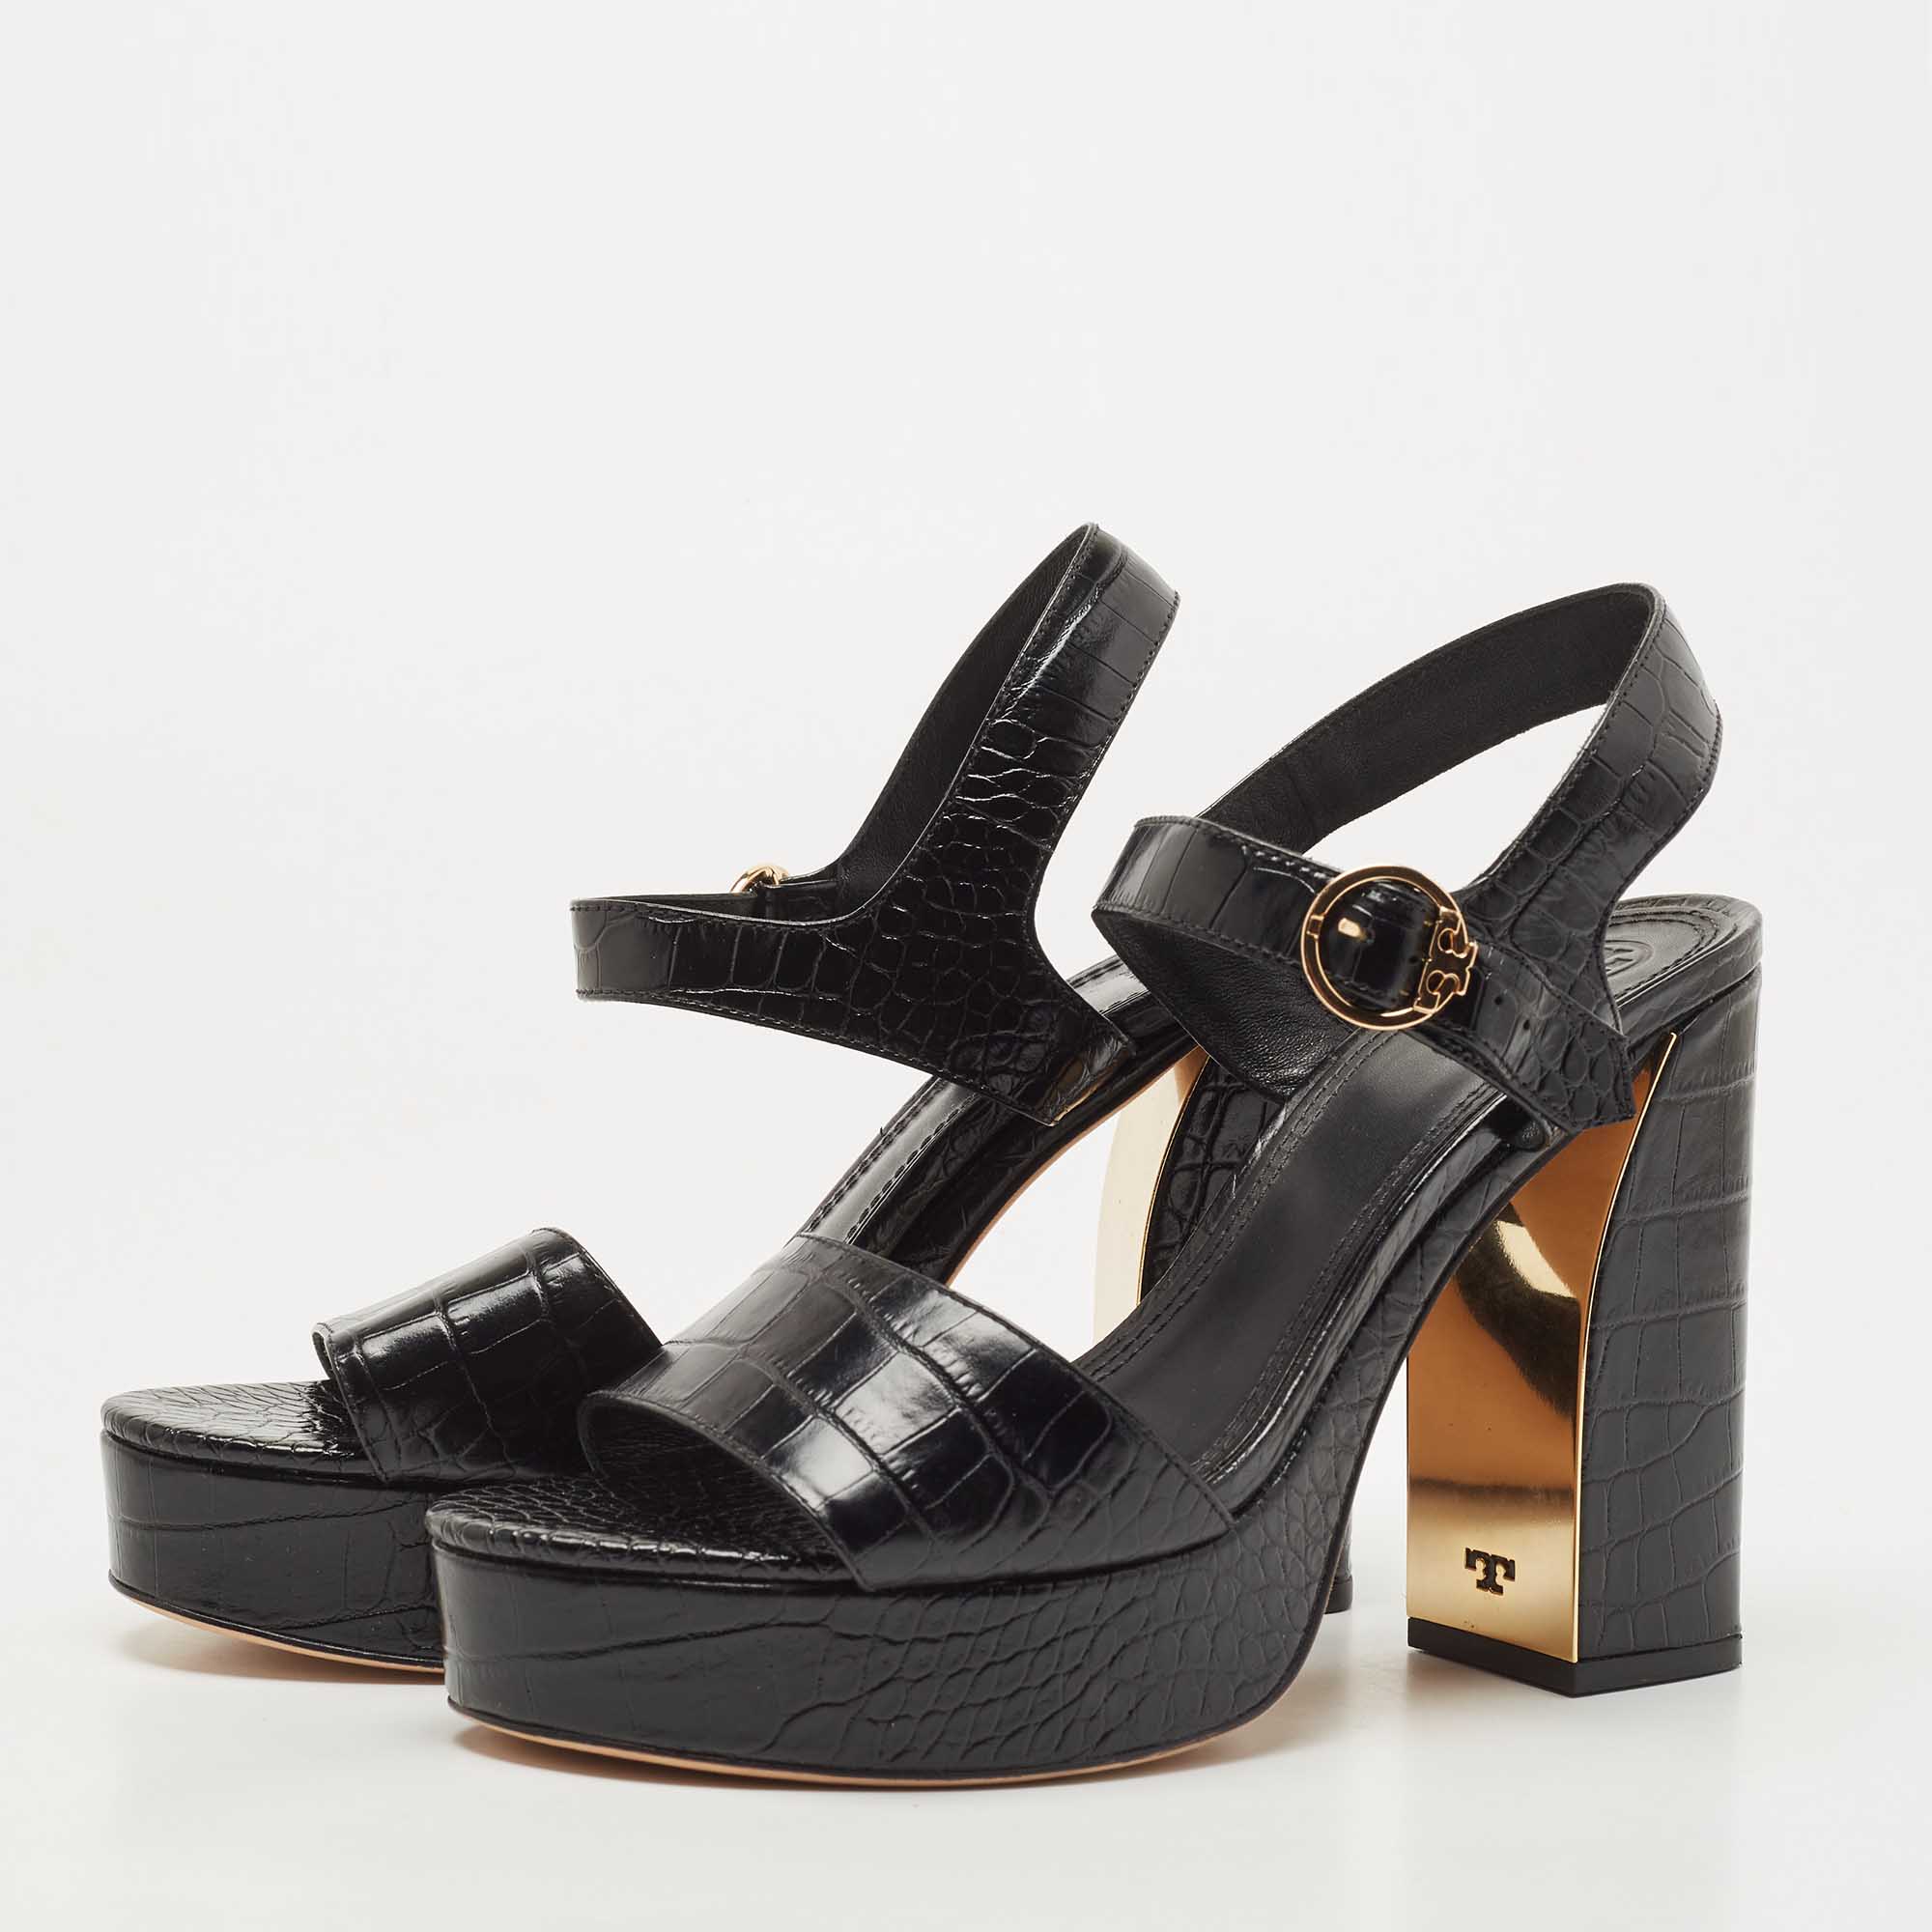 

Tory Burch Black Croc Embossed Leather Block Heel Ankle Strap Sandals Size